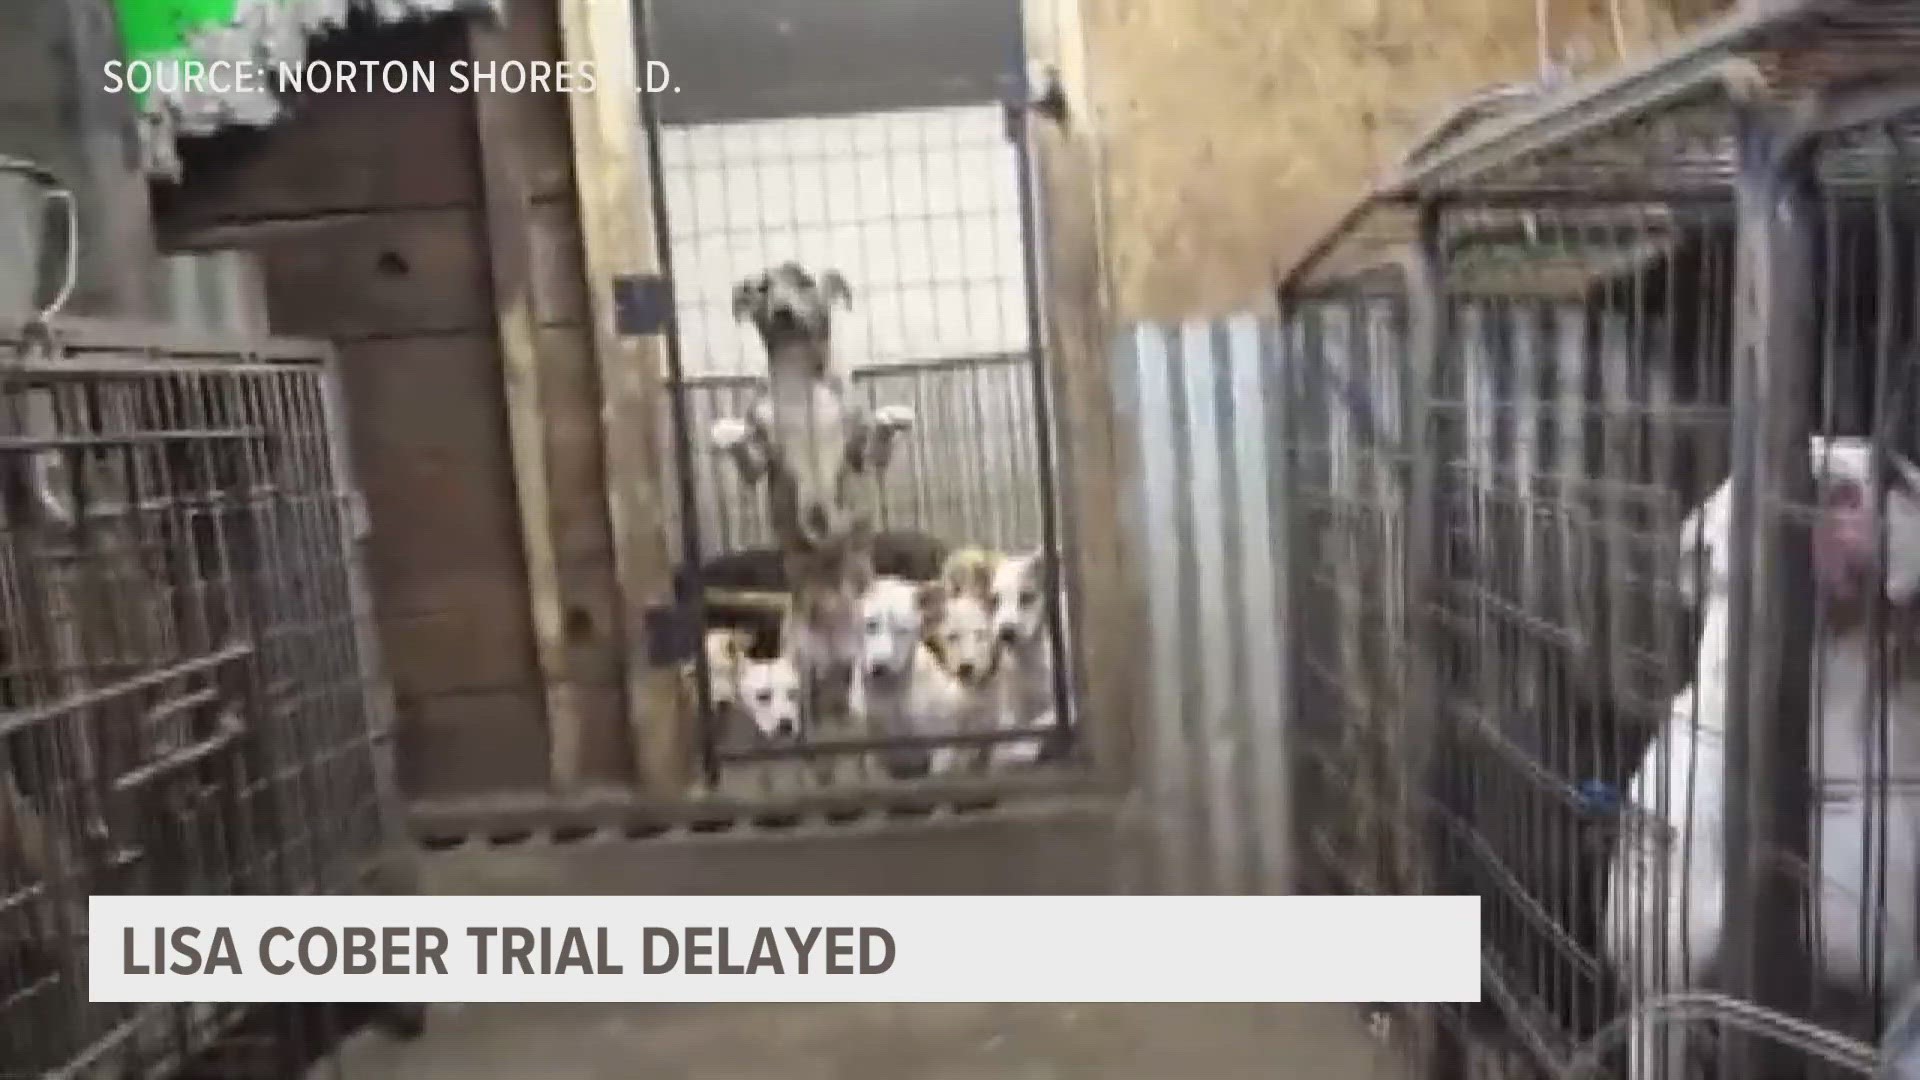 Harbor Humane director Jen Self-Aulgur, who's shelter helped rescue many of Cober's dogs, is disappointed the trial has taken so long to begin.